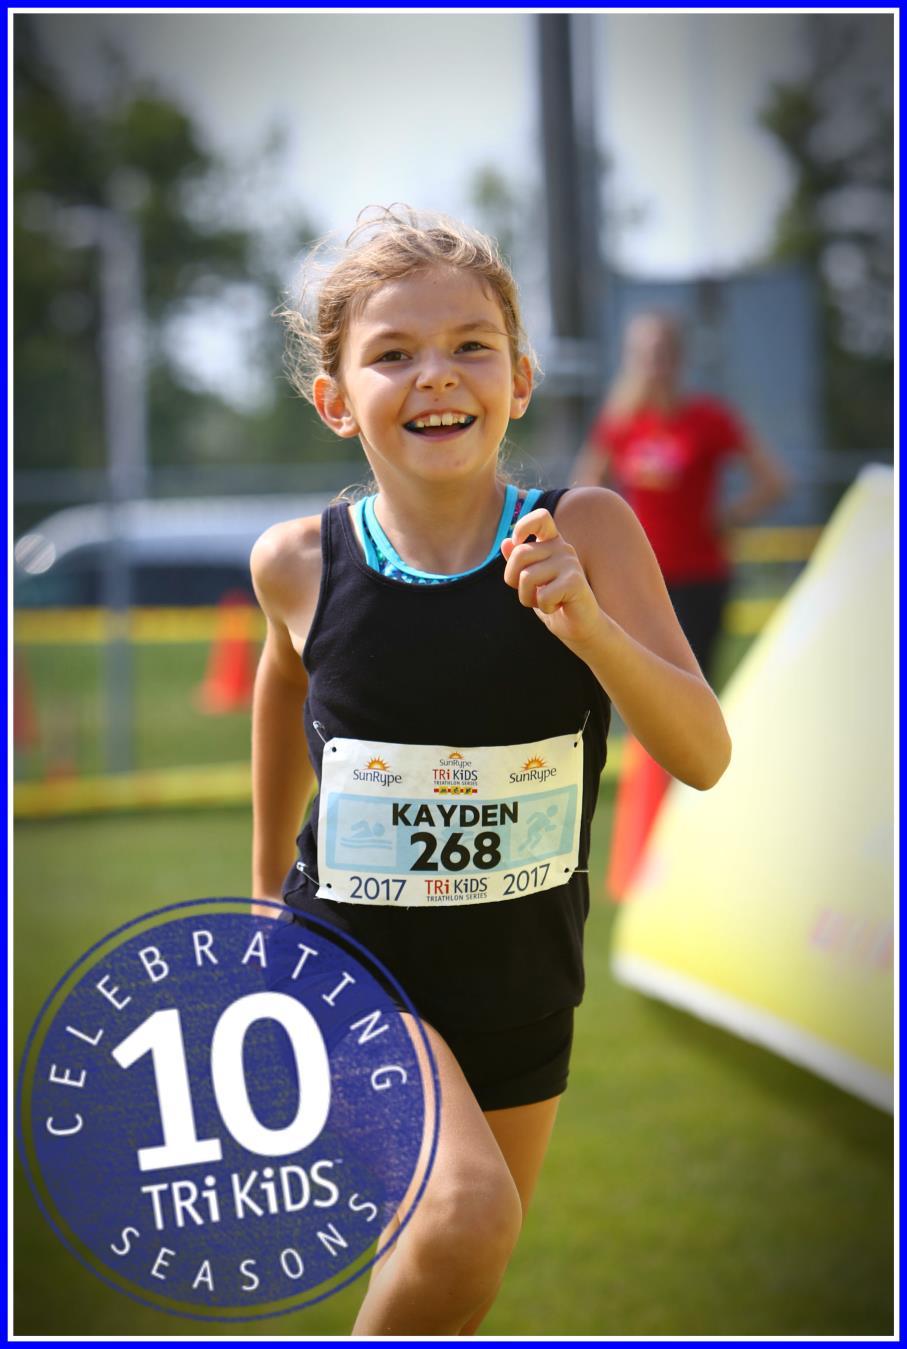 Bill TRi KiDS BURNABY RACE WEEKEND GUIDE Everything you need to know for Race Weekend!